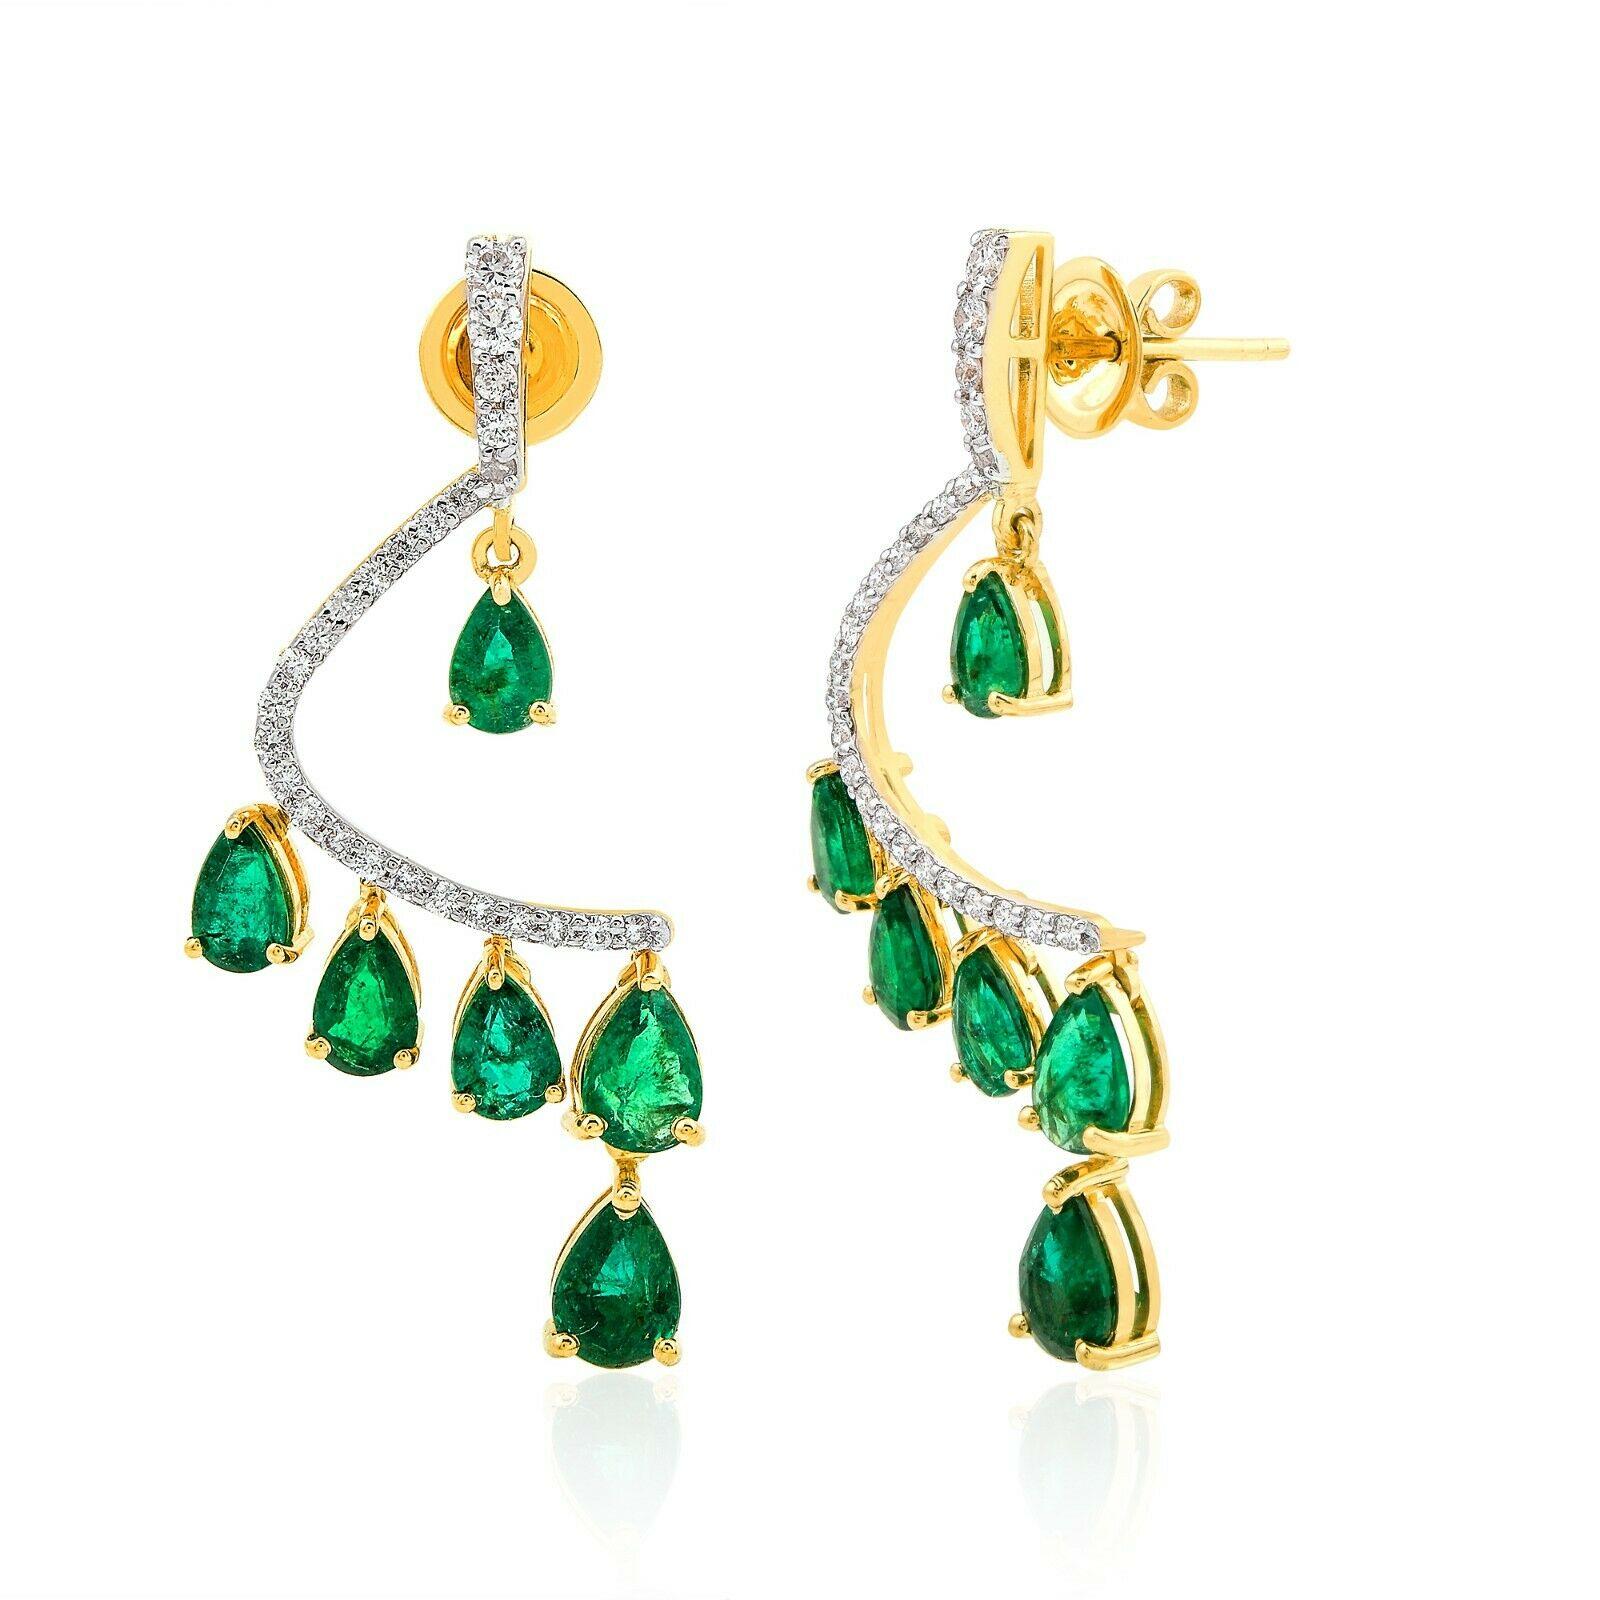 Cast in 14-karat gold, these beautiful earrings are hand set with 5.28 carats of emerald and .71 carats of sparkling diamonds. 

FOLLOW  MEGHNA JEWELS storefront to view the latest collection & exclusive pieces.  Meghna Jewels is proudly rated as a